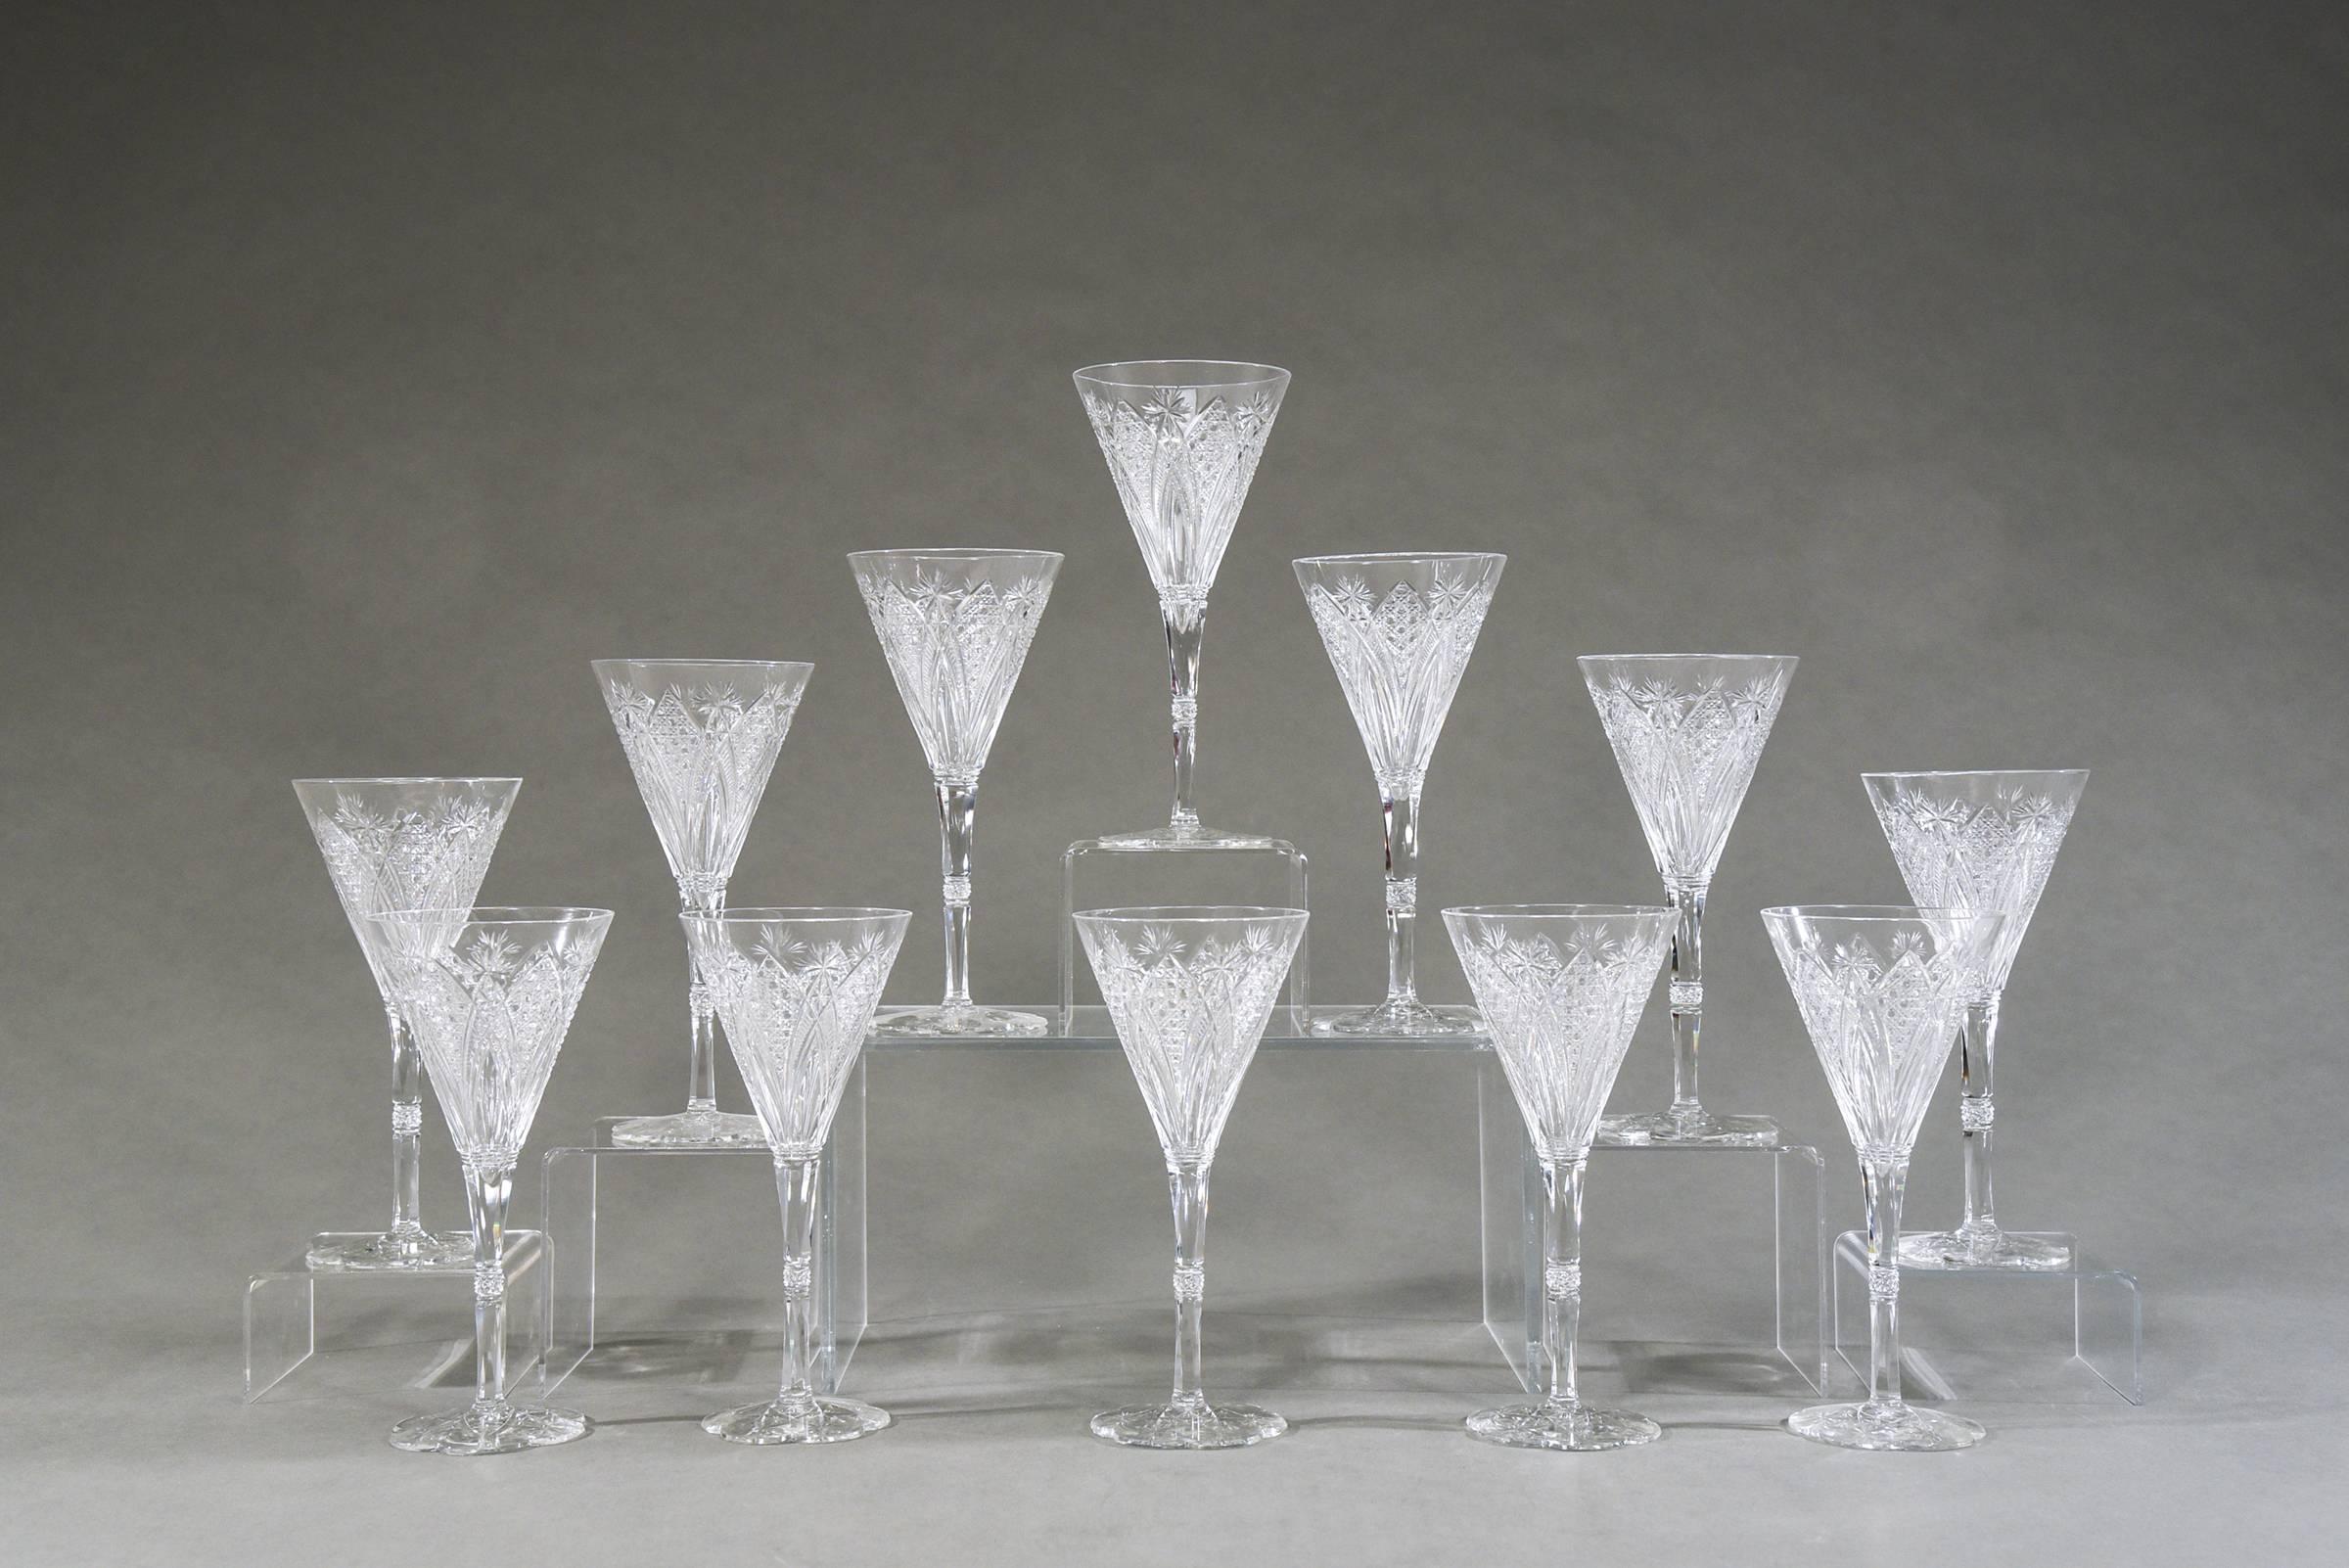 This is an amazing set of 12 signed Baccarat water goblets in the rare Elbeuf pattern. The service was first introduced in 1908 and presented at the International Exhibition in Nancy, France in 1909. Specially ordered in 1920 by the Maharaja of